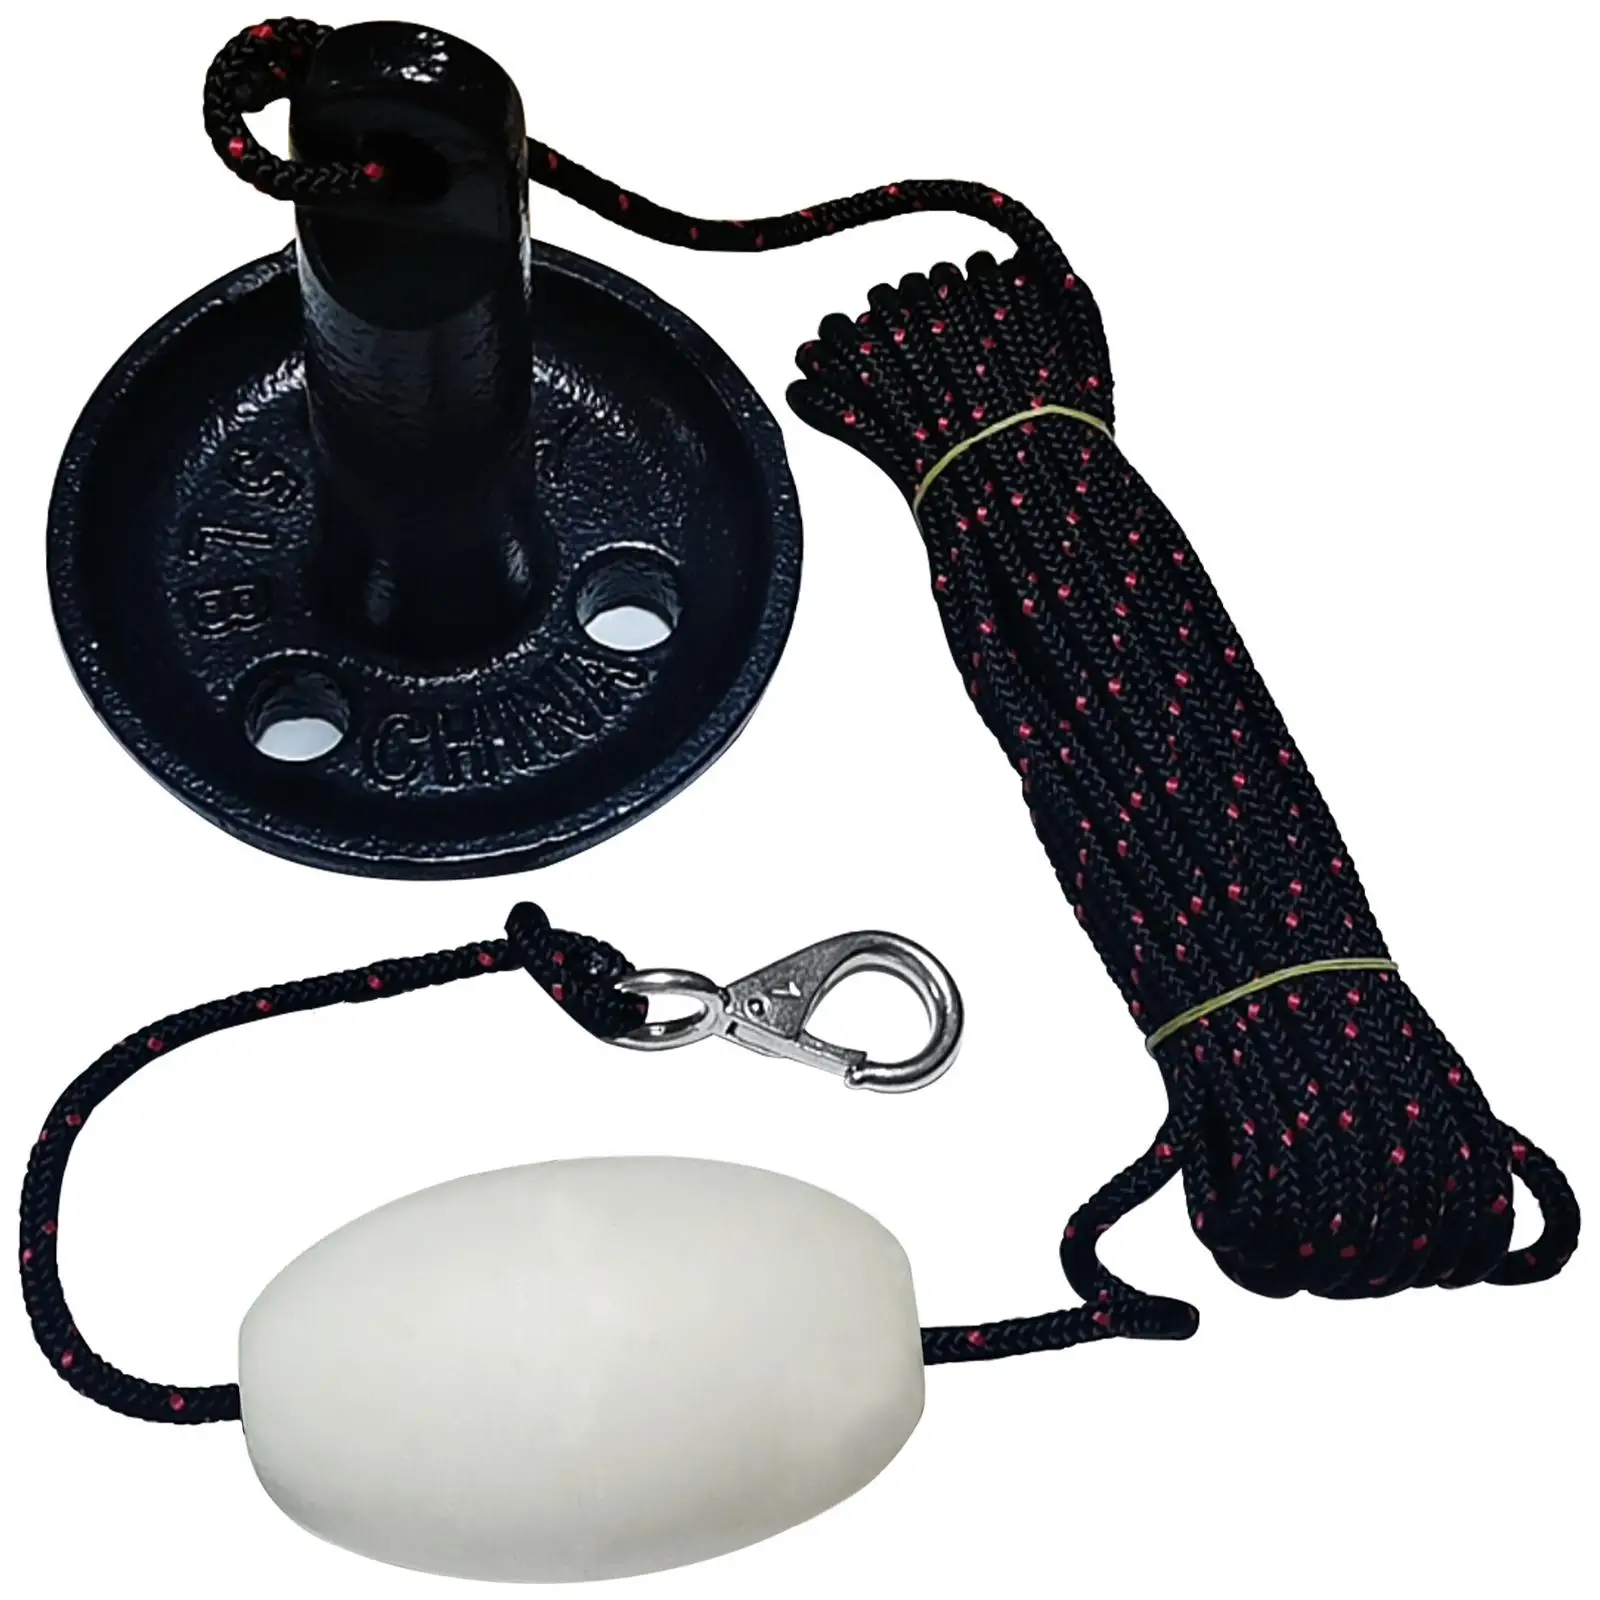 Complete Mushroom Anchor Kit Accessories with Rope Marker Buoy Fit for Paddle Board Canoe